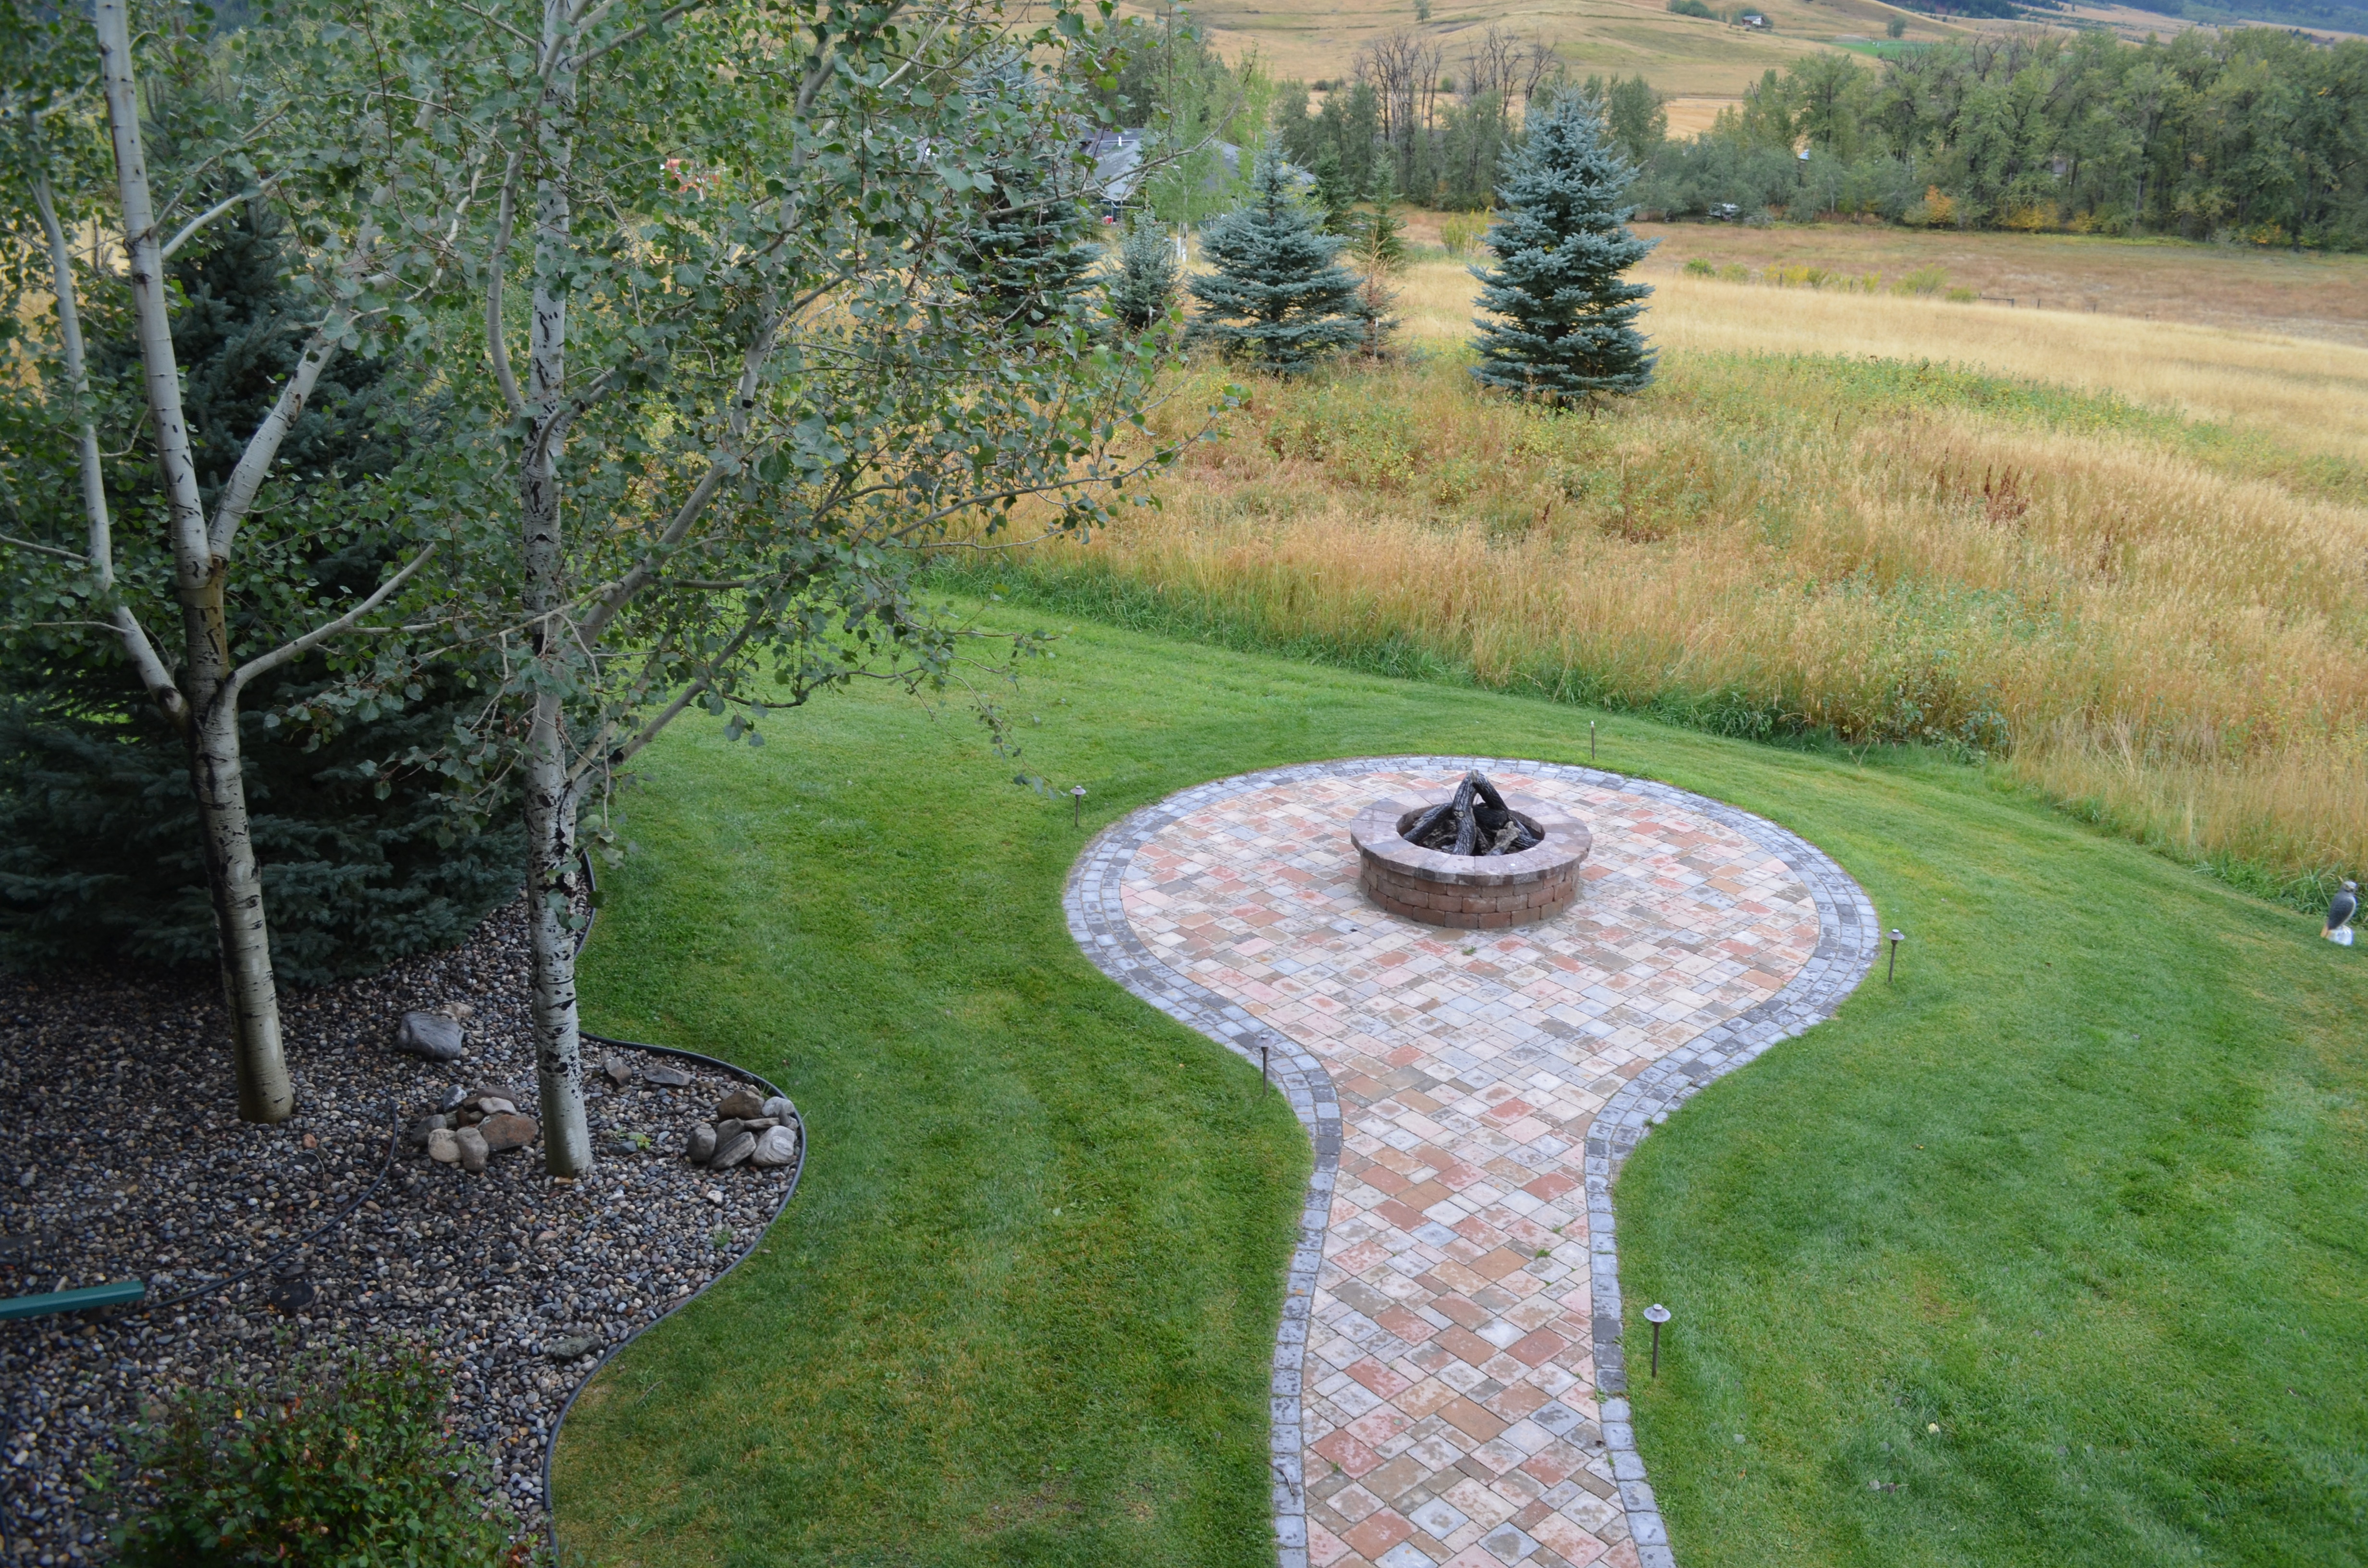 Fantastic custom paver patio, walkway & fire pit; as well as. full landscape installation.